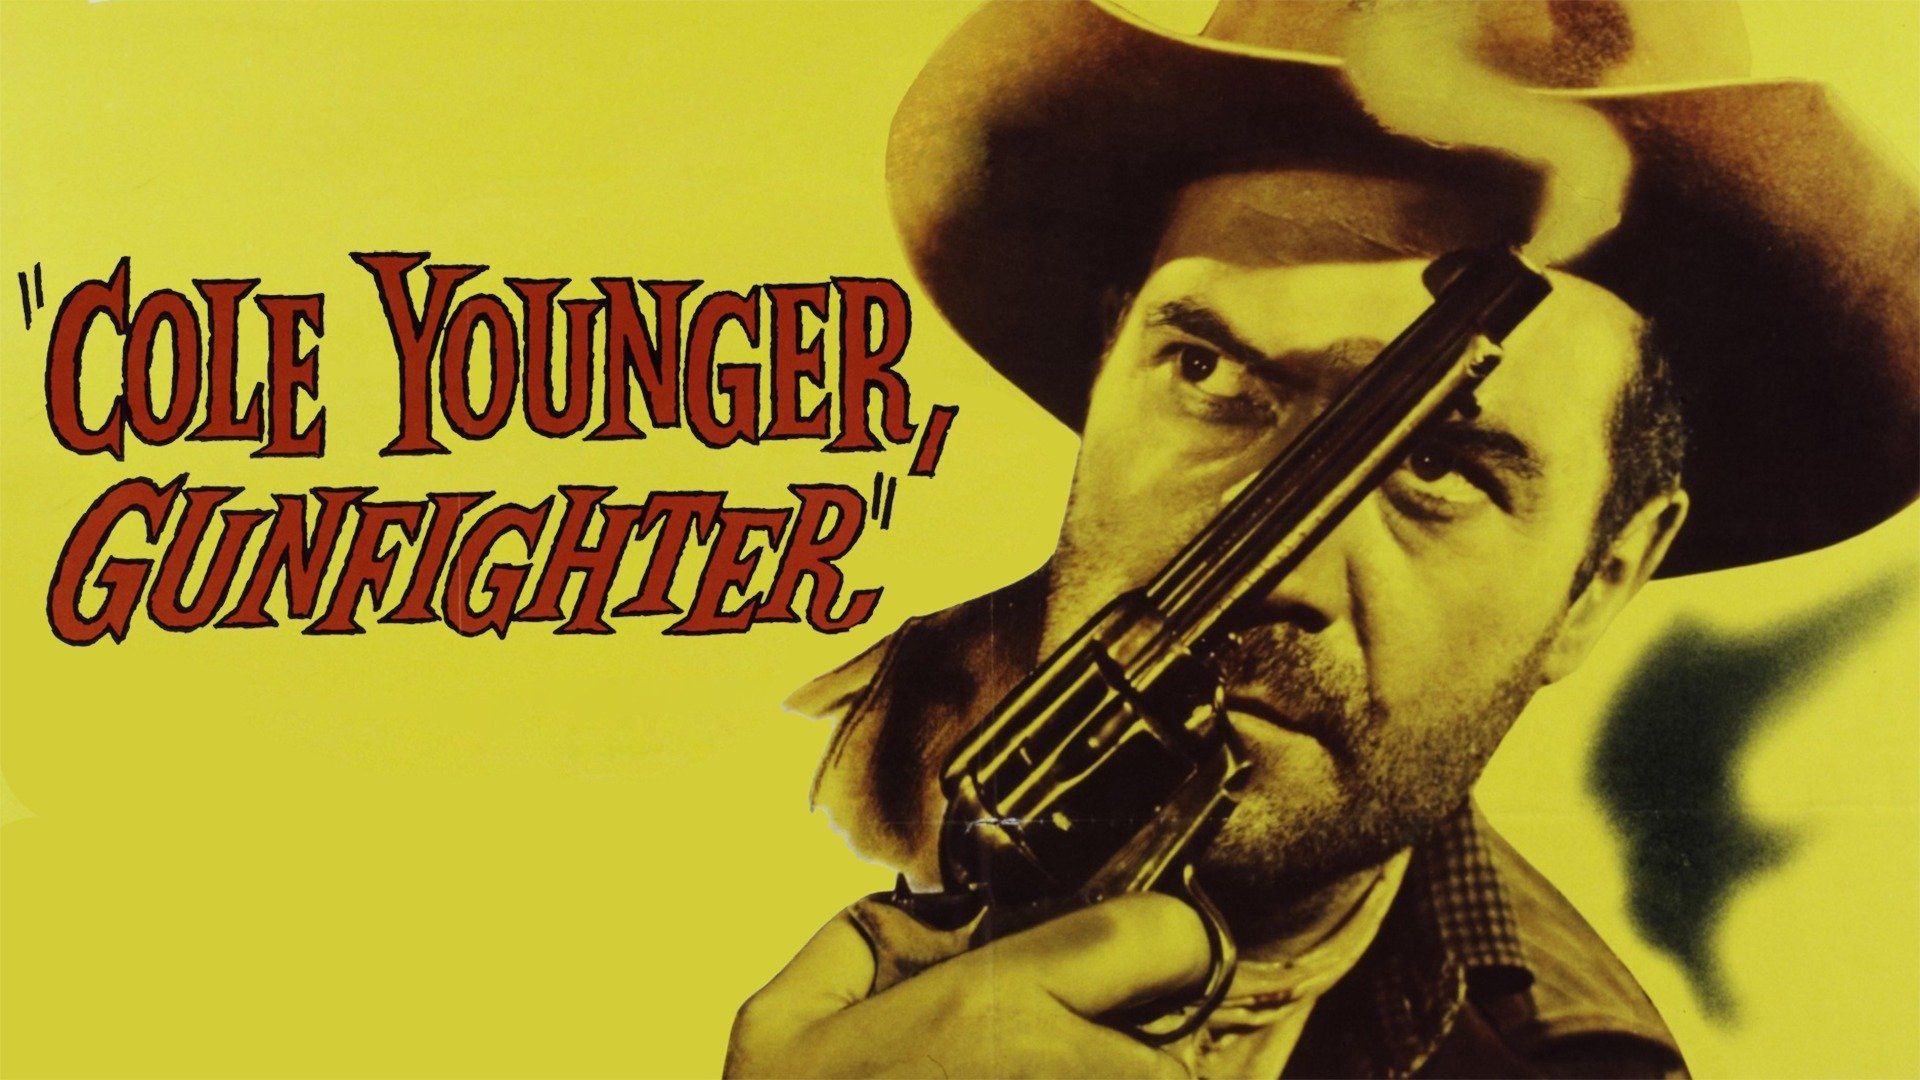 Cole Younger, Gunfighter Backdrop